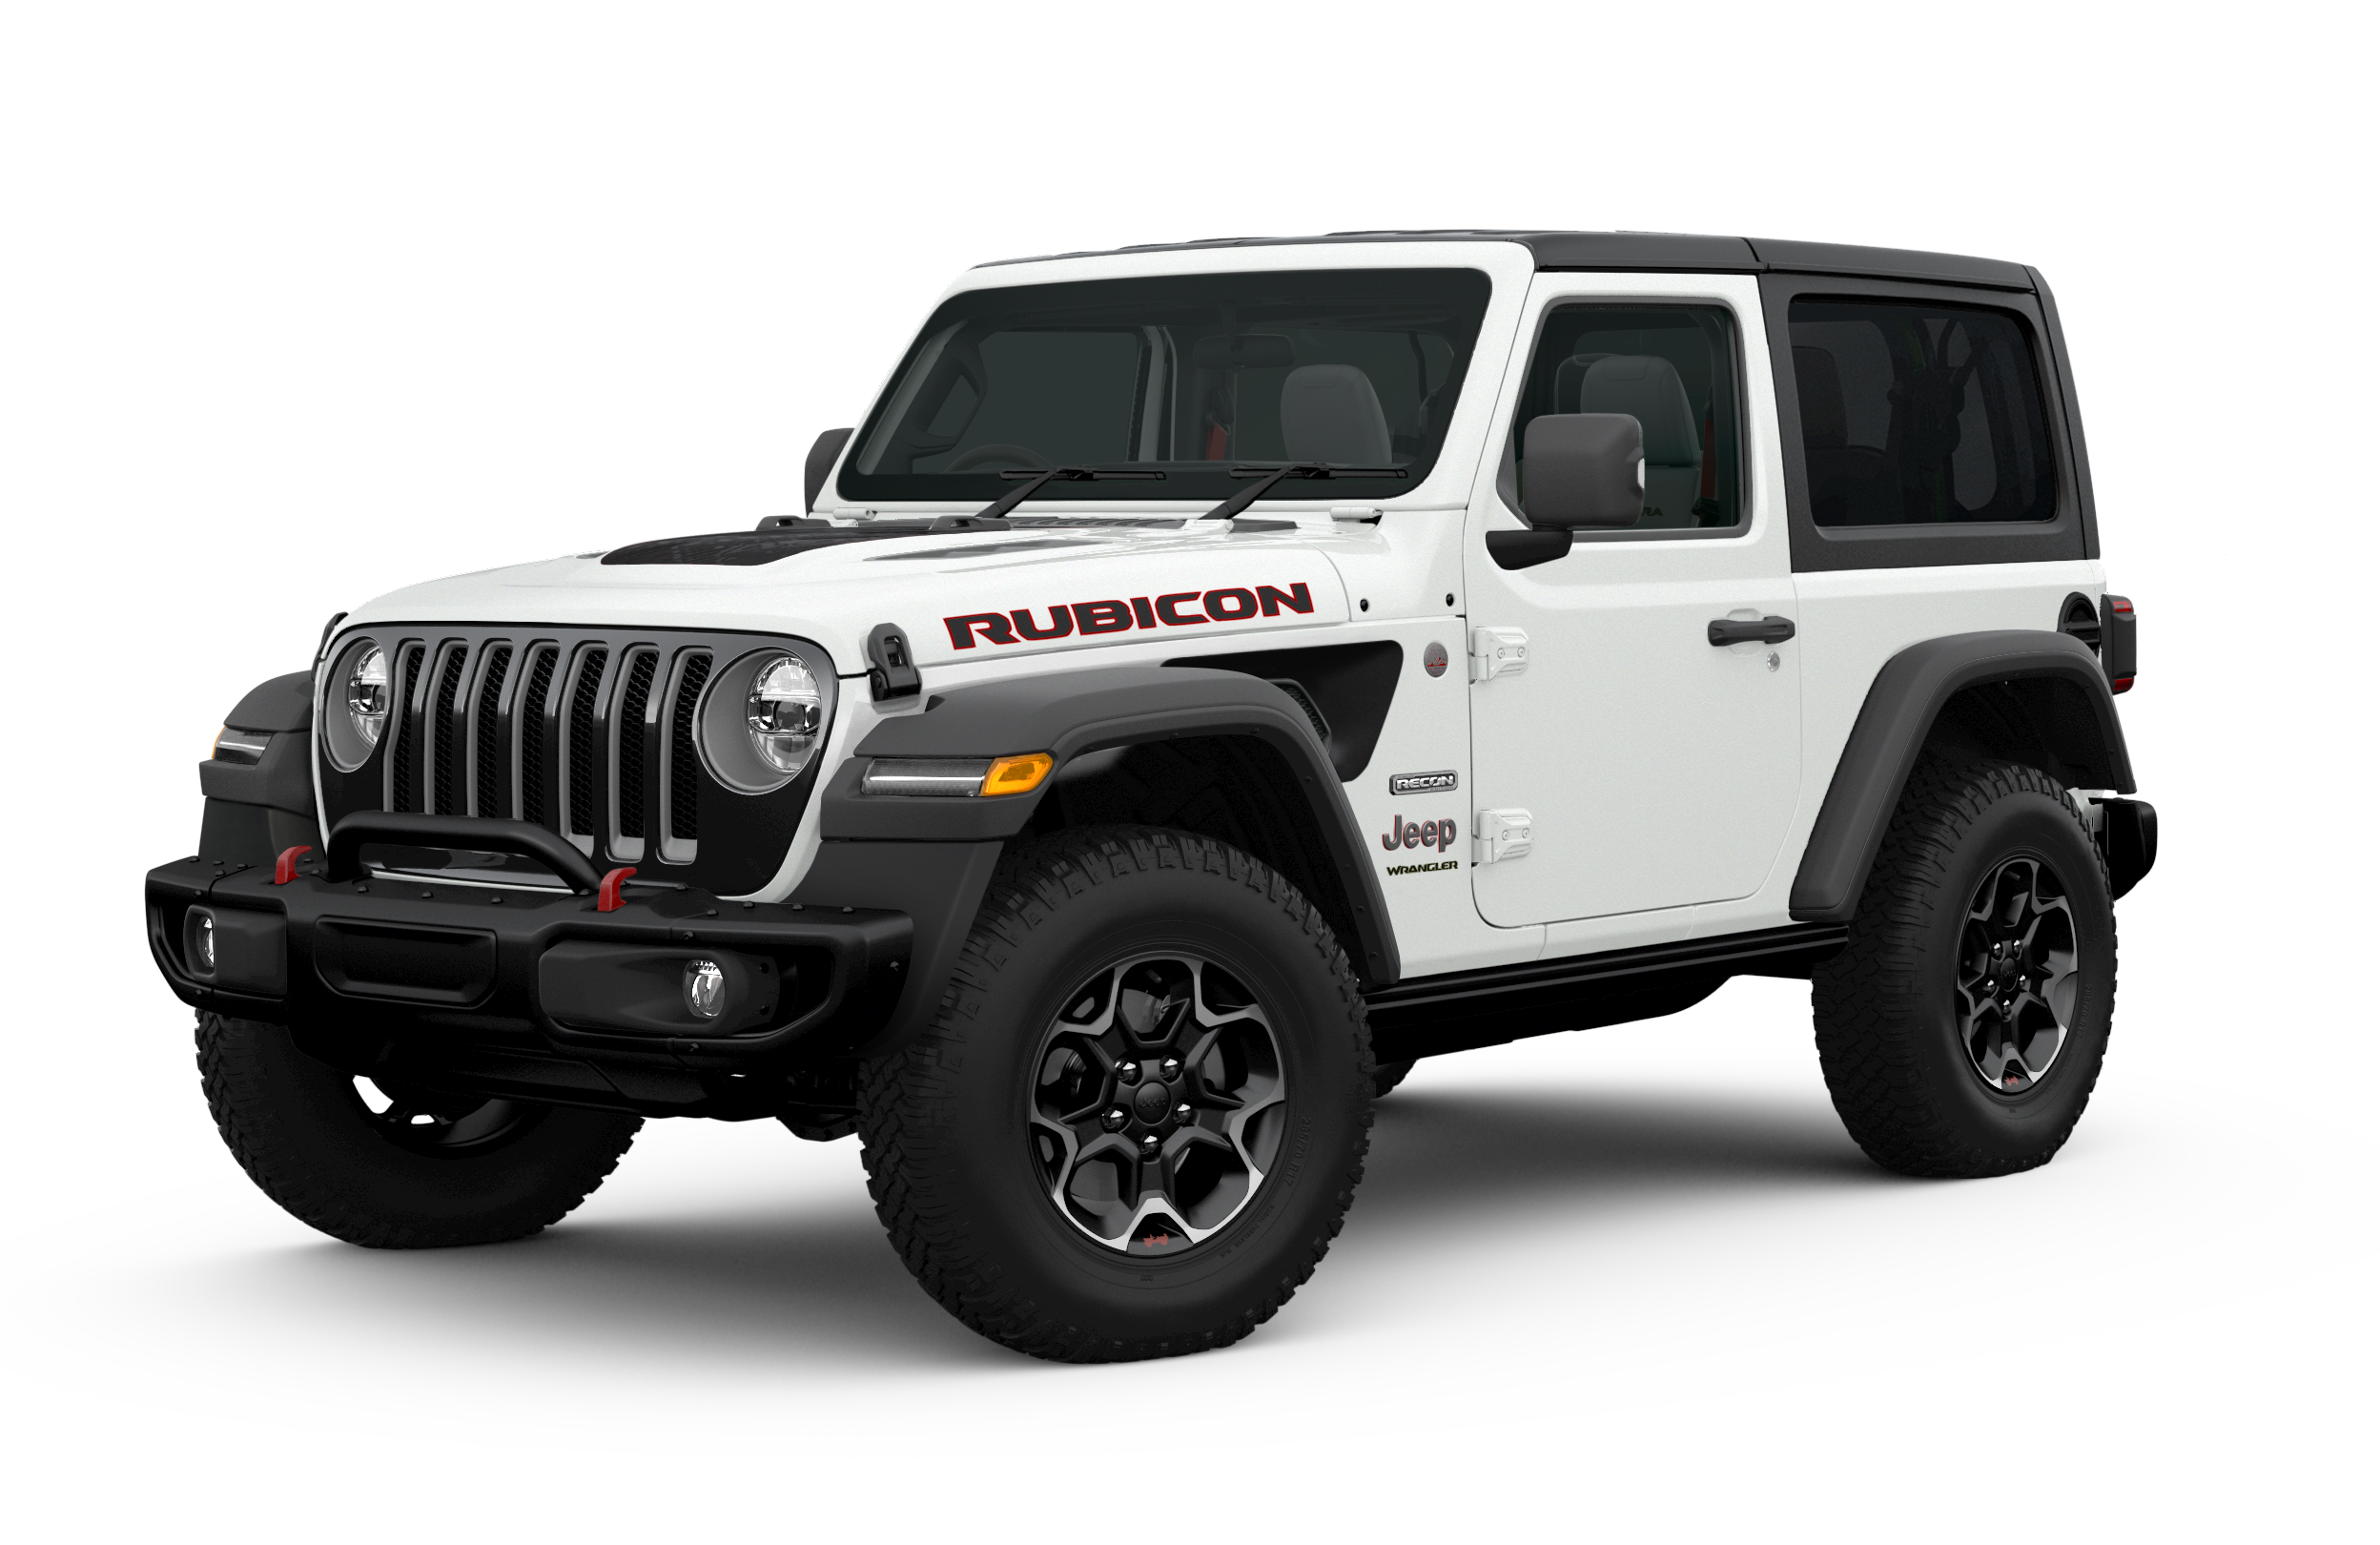 Jeep Wrangler shorty returns as a limited edition | CarExpert